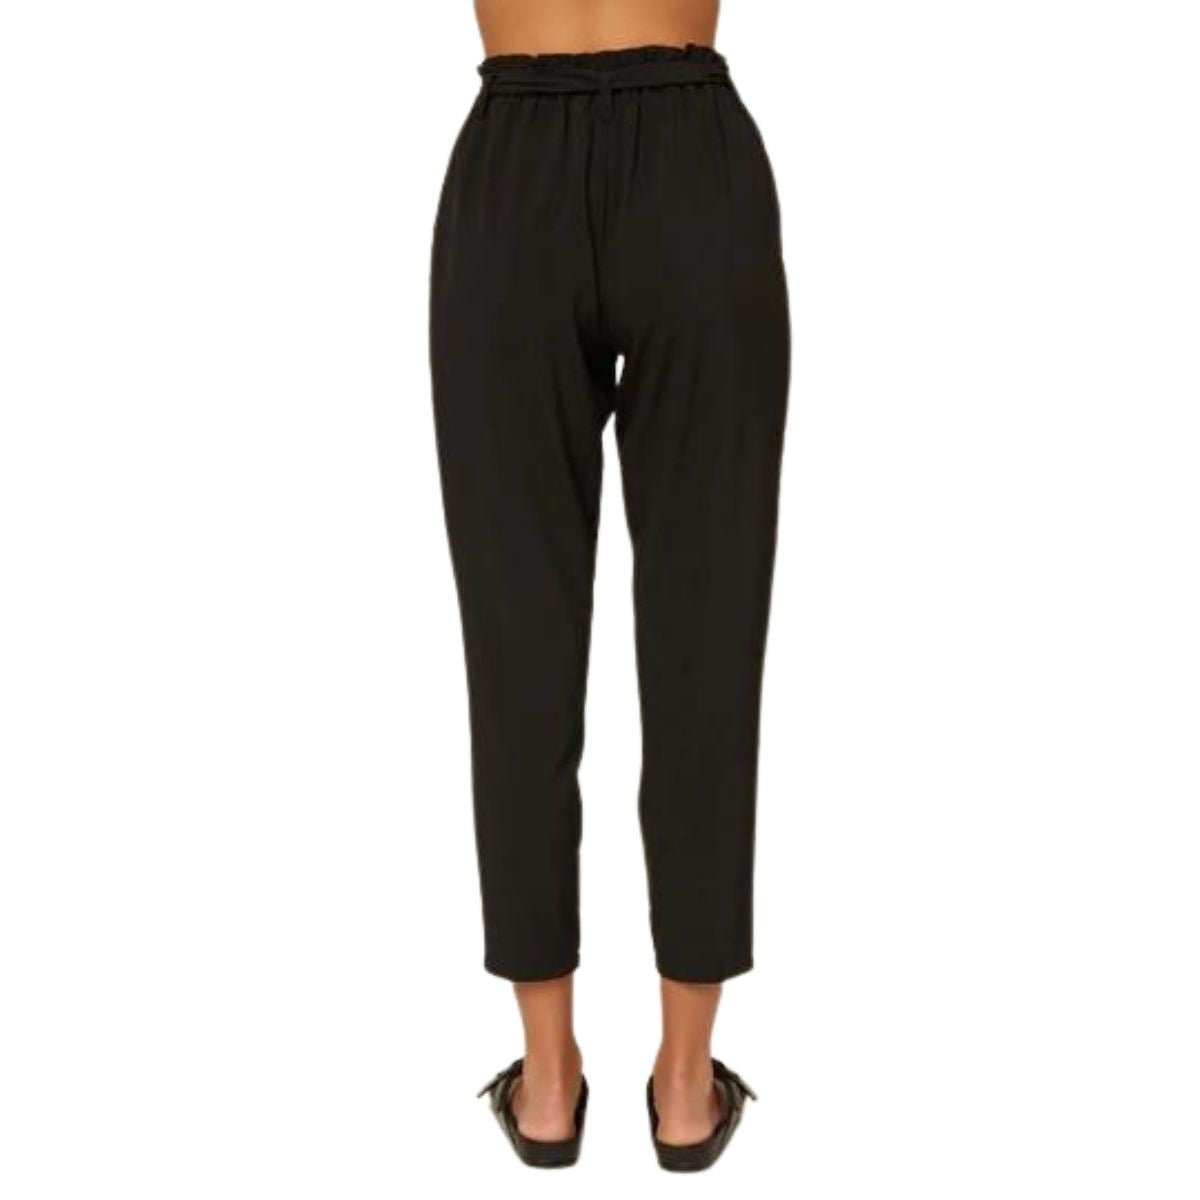 O'Neill Layover Hybrid Pants in Black